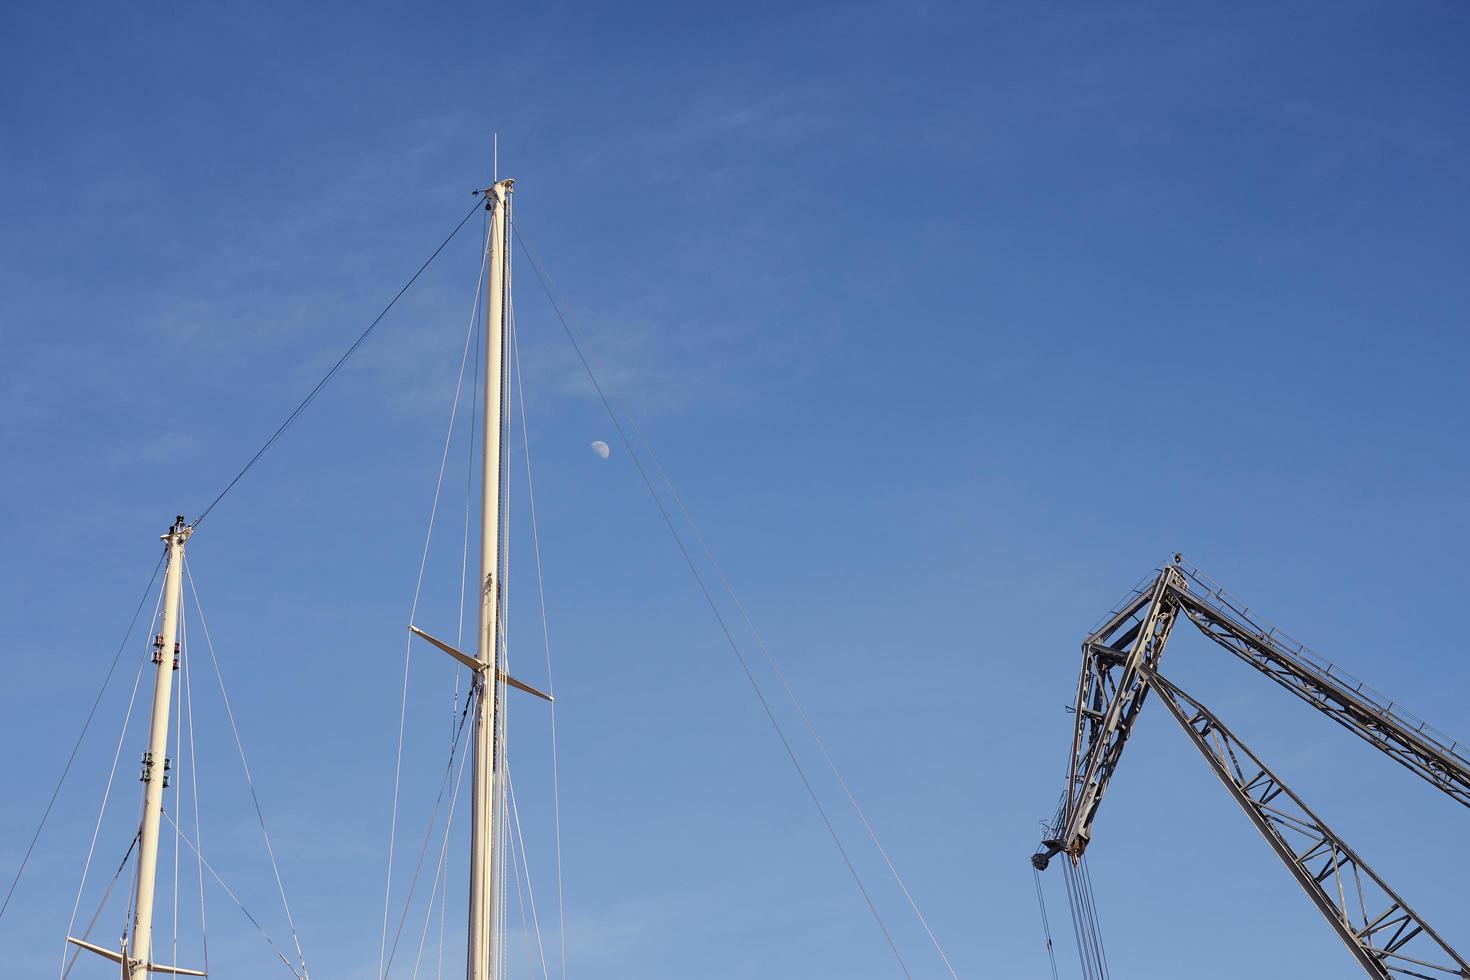 Boat masts and a crane against a blue sky with the moon photo